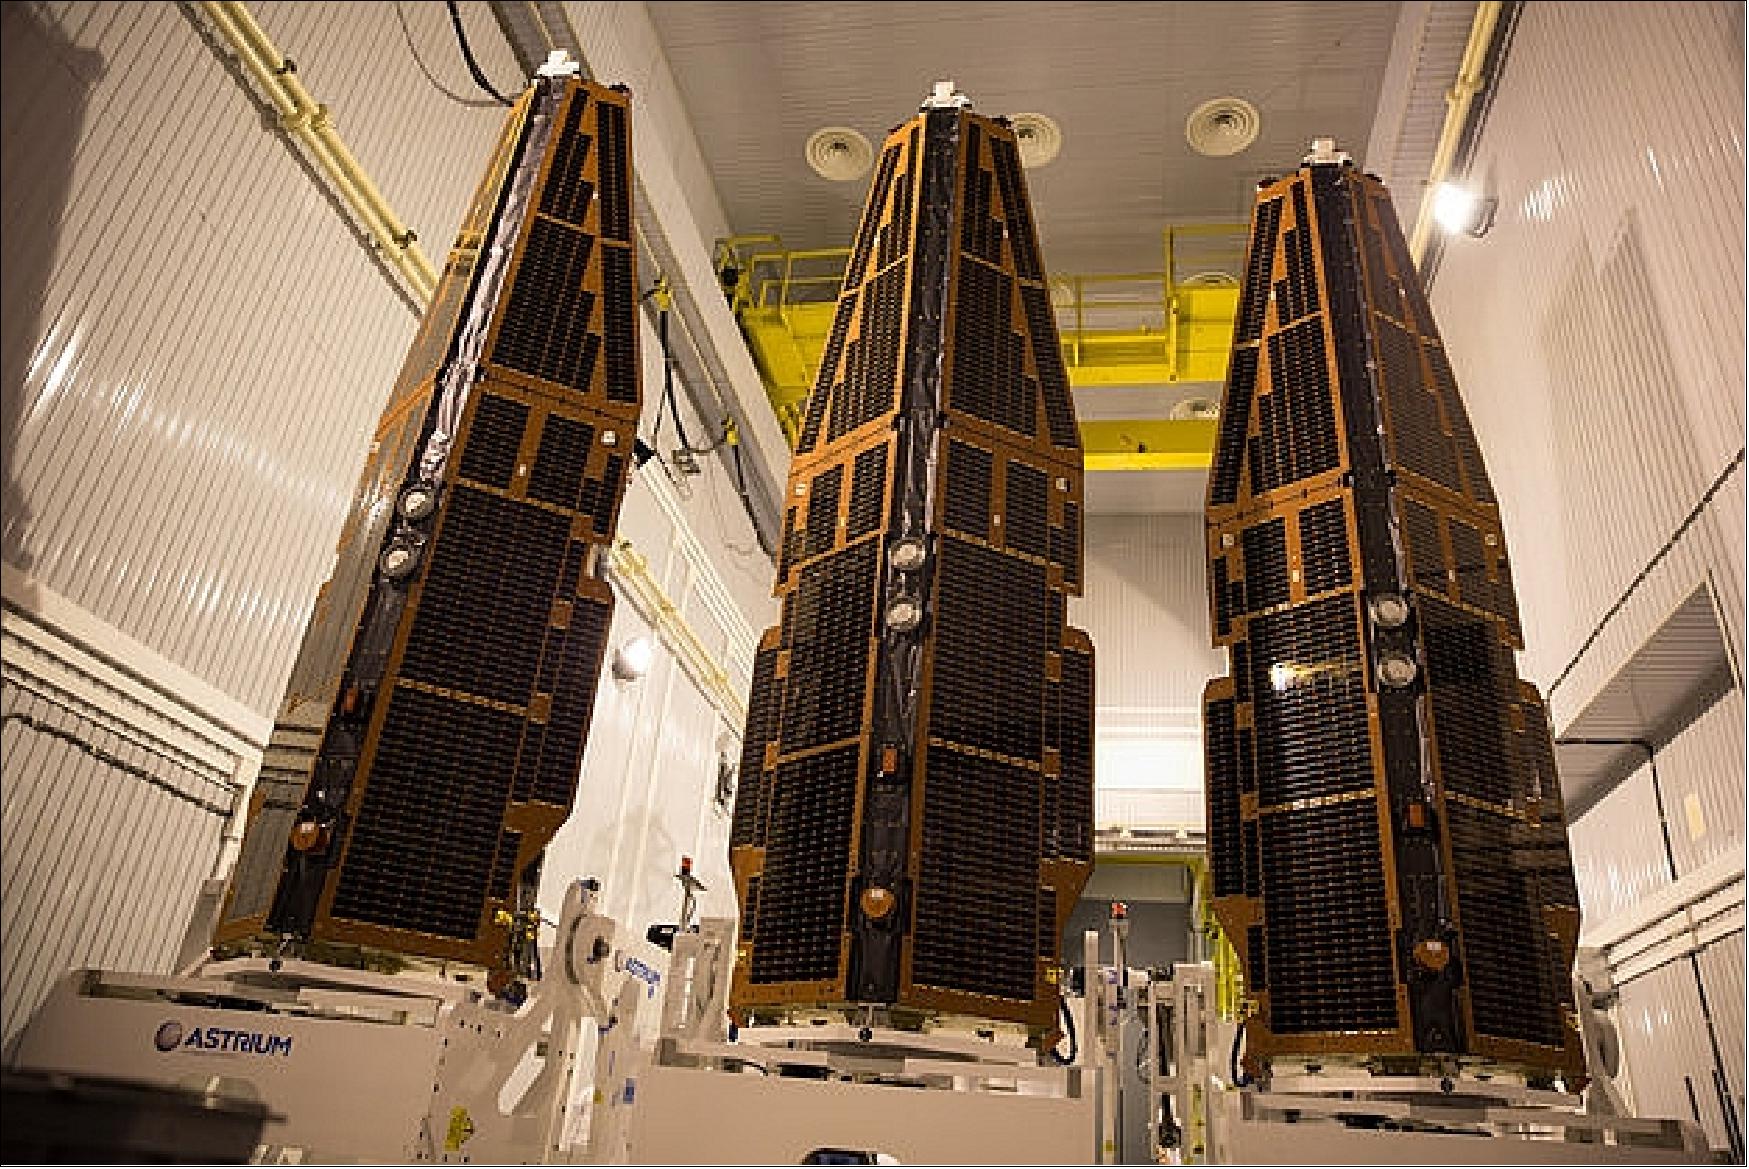 Figure 18: Photo of the three Swarm satellites at the launch site (image credit: ESA)